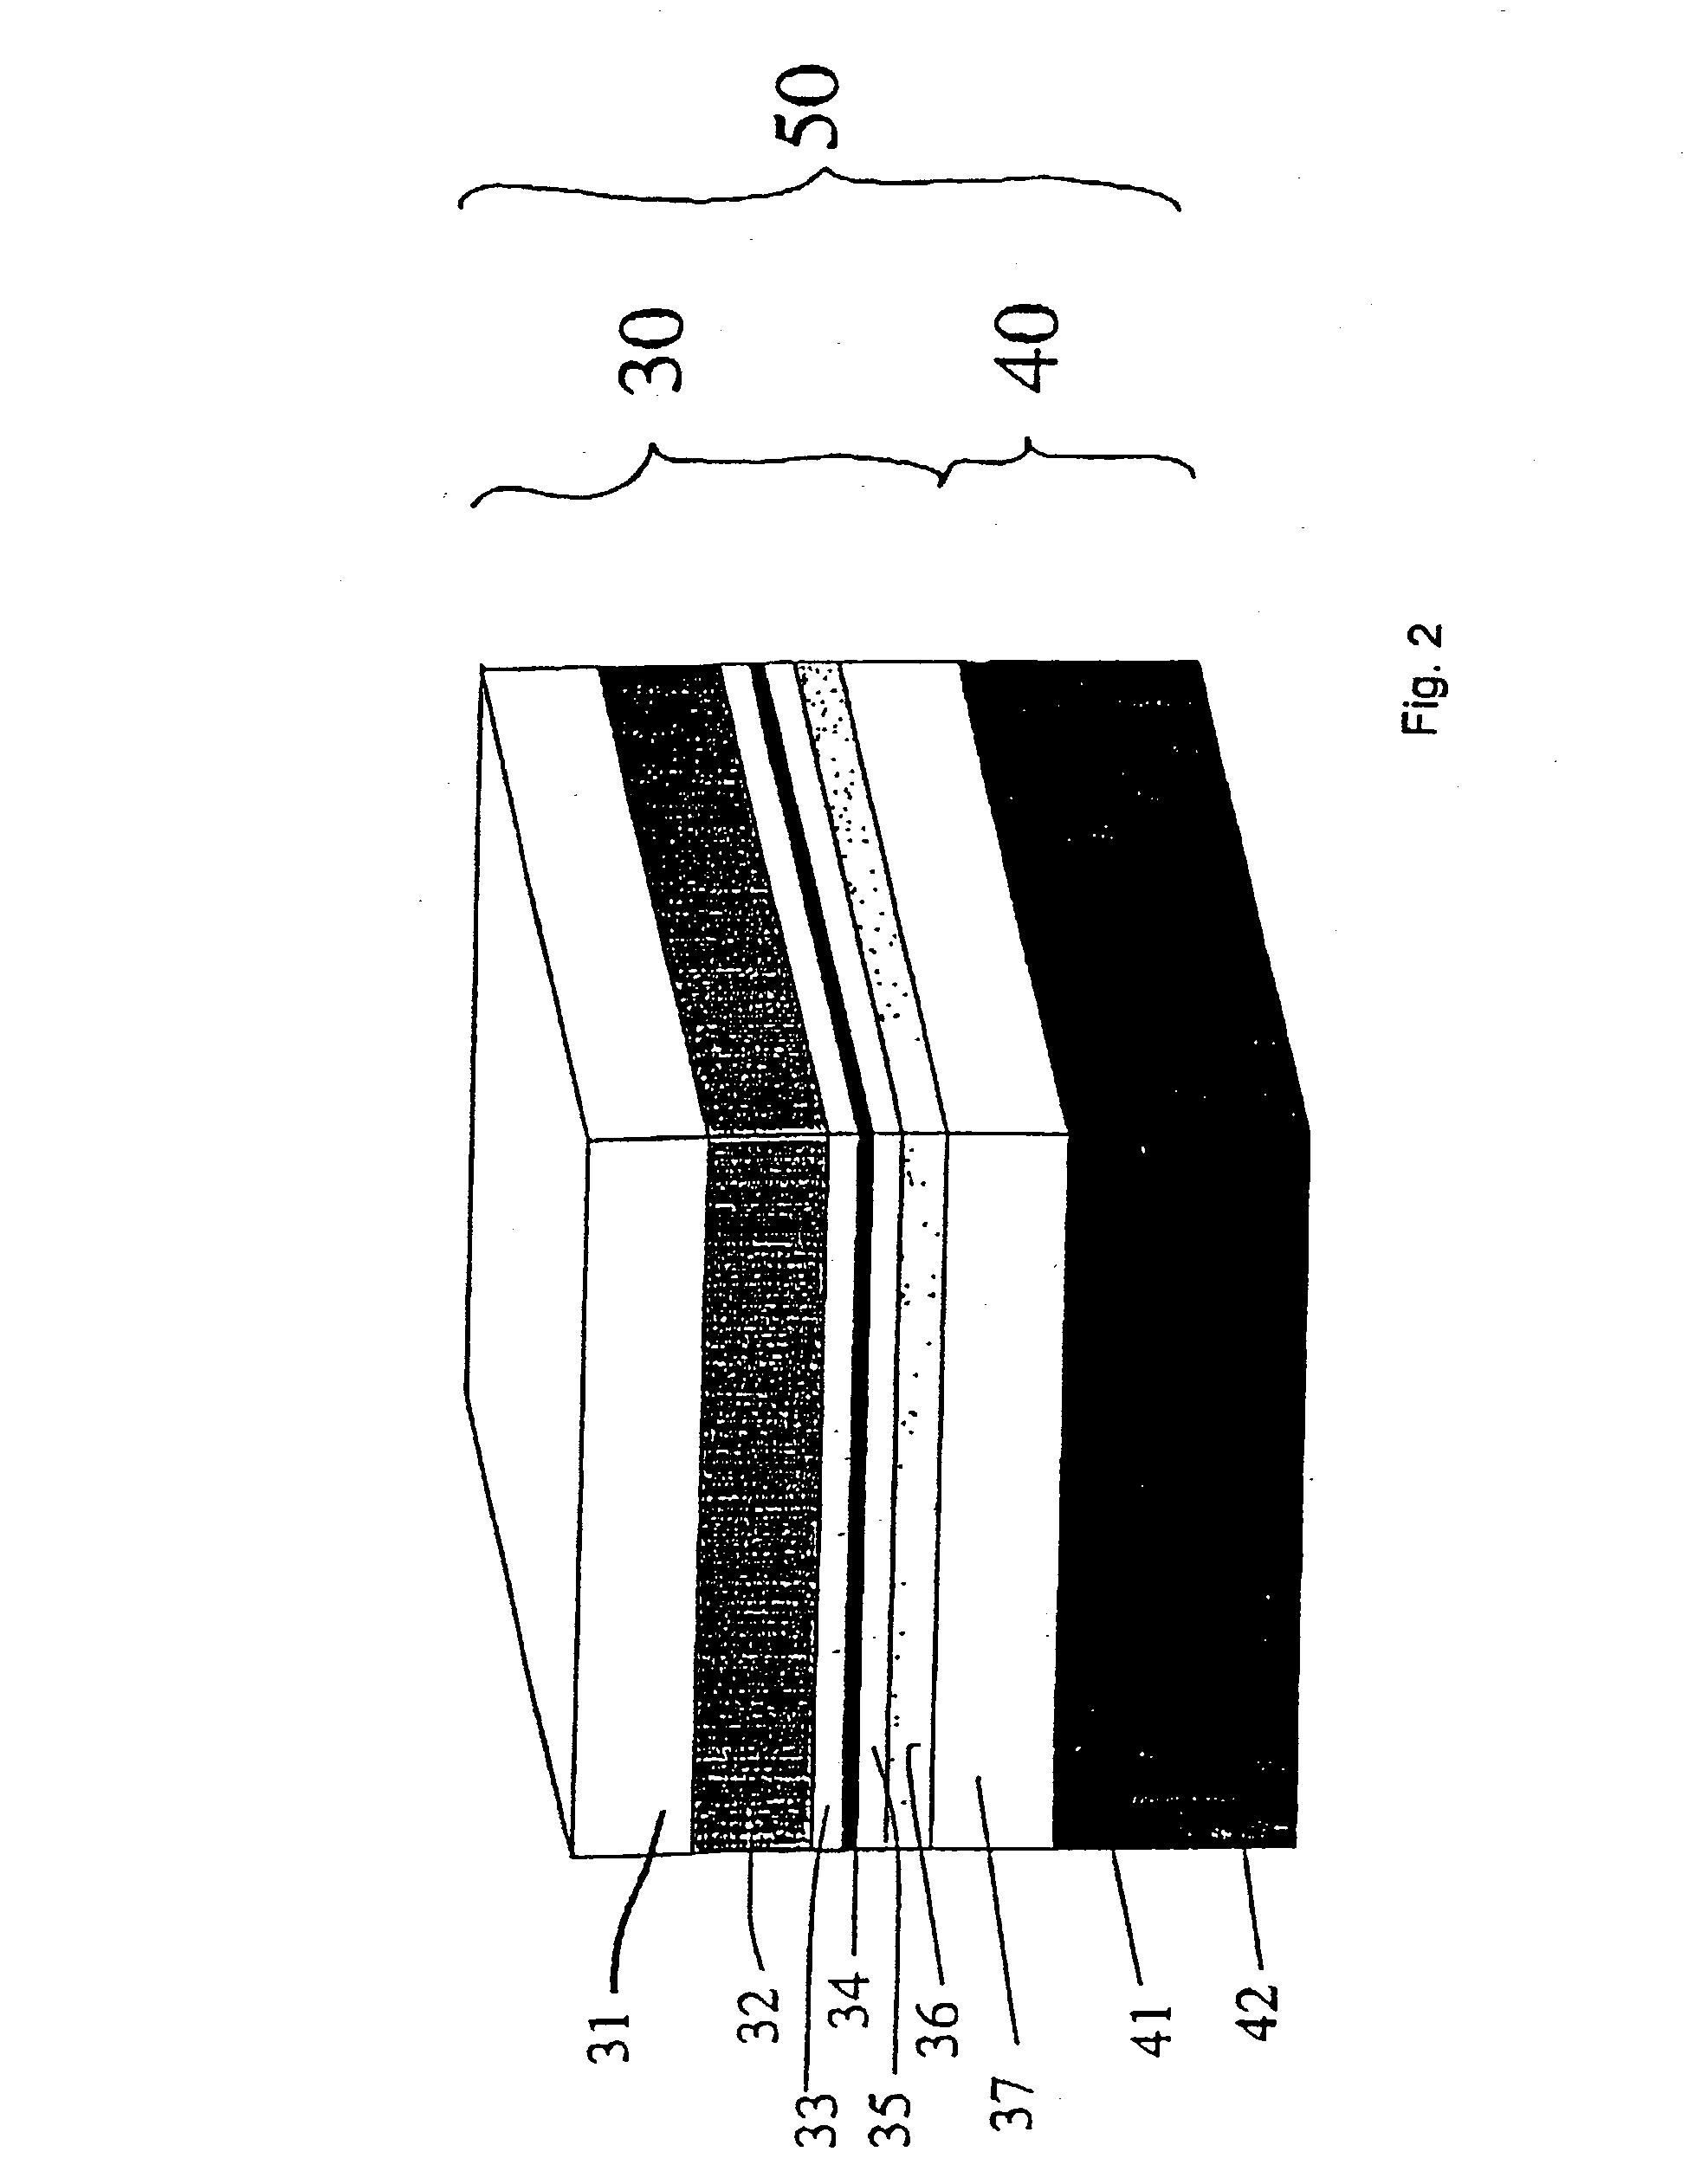 Magnetic storage device